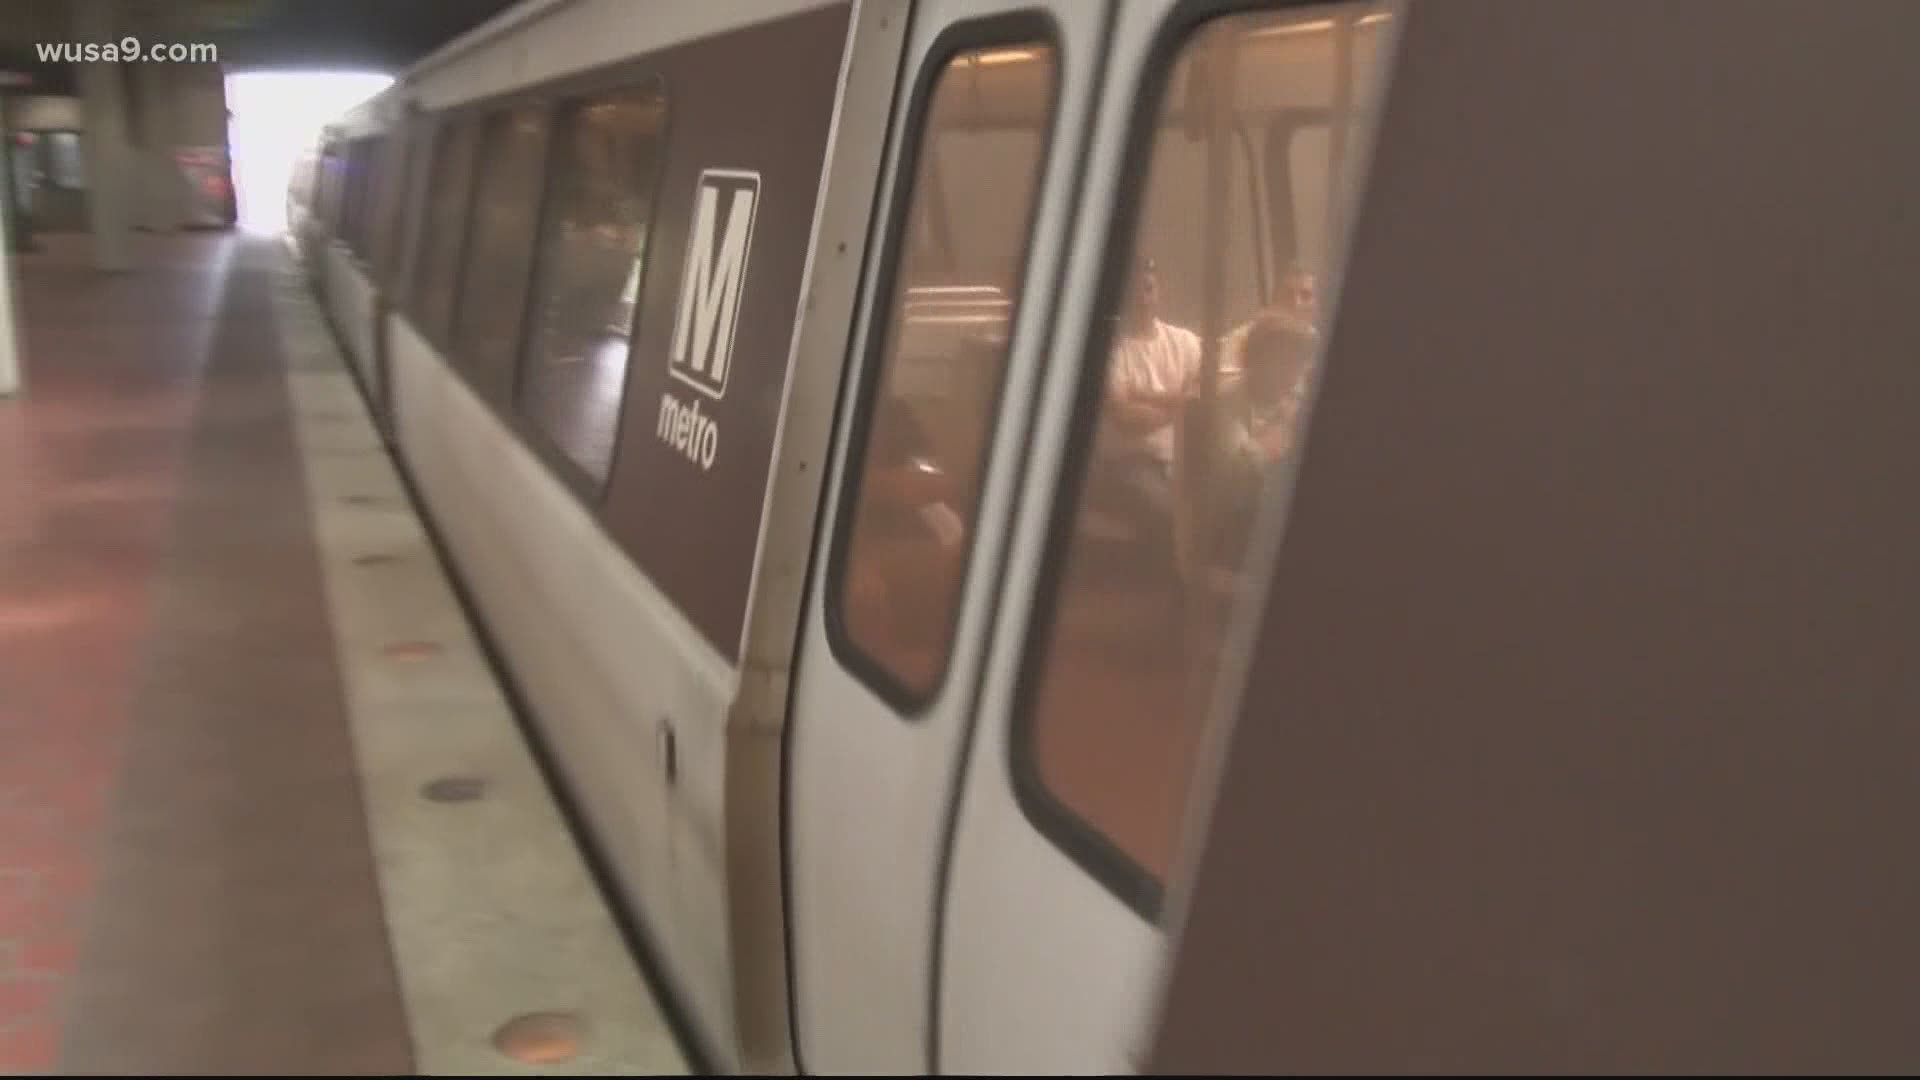 More than $800 million of federal relief will go toward the DMV to help keep public transportation afloat.